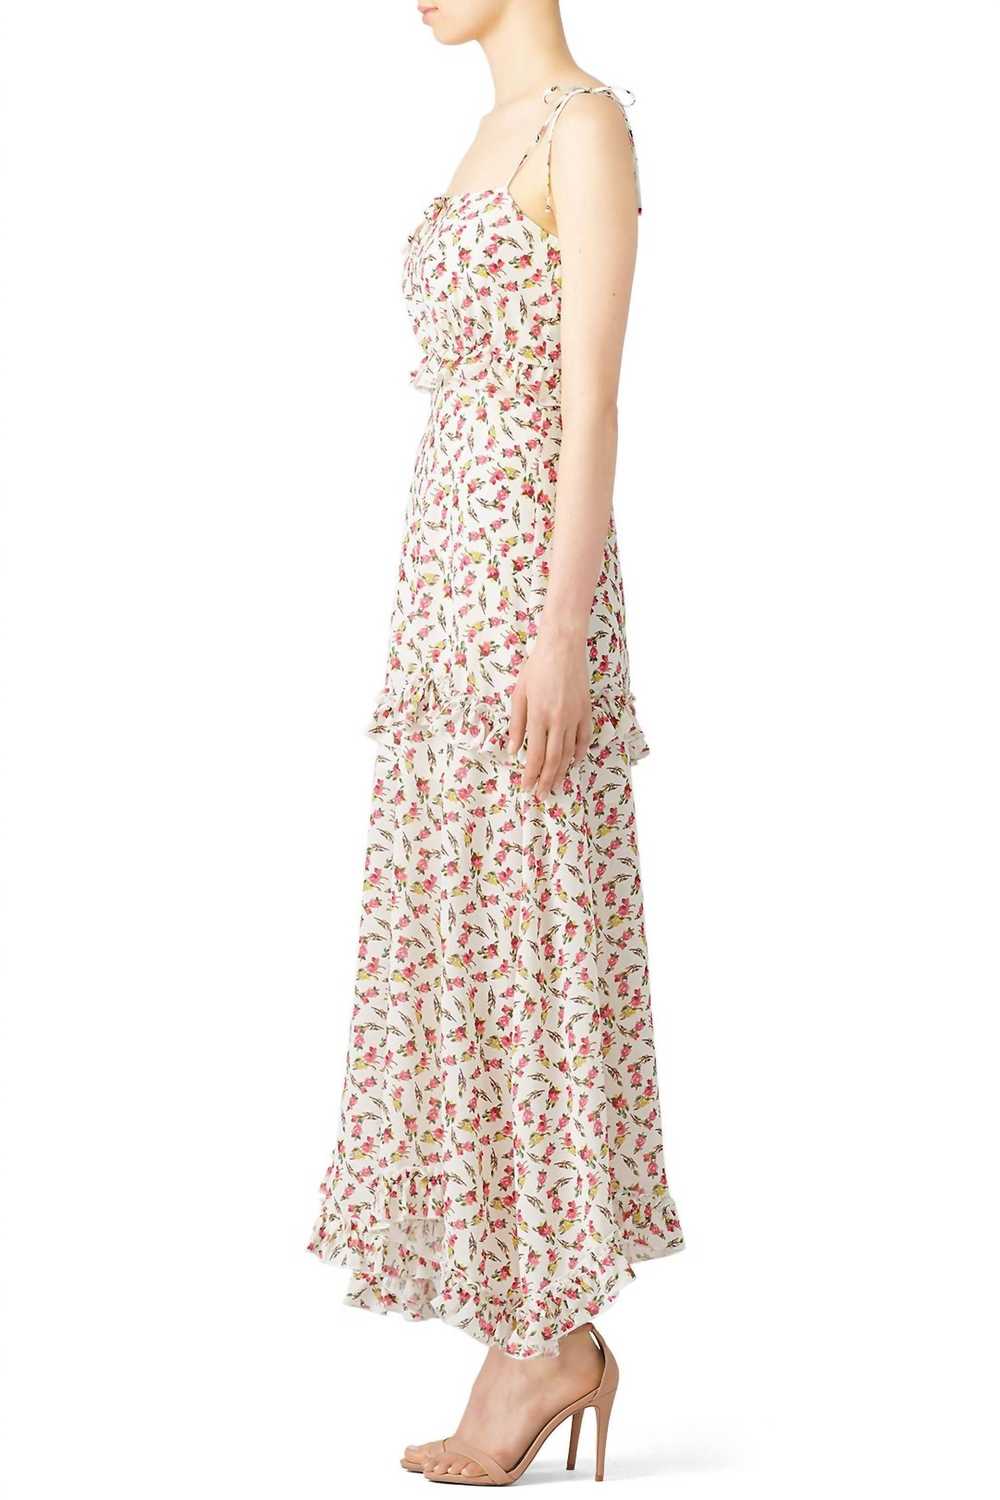 Slate & Willow pre-loved ivory rose floral maxi d… - image 2